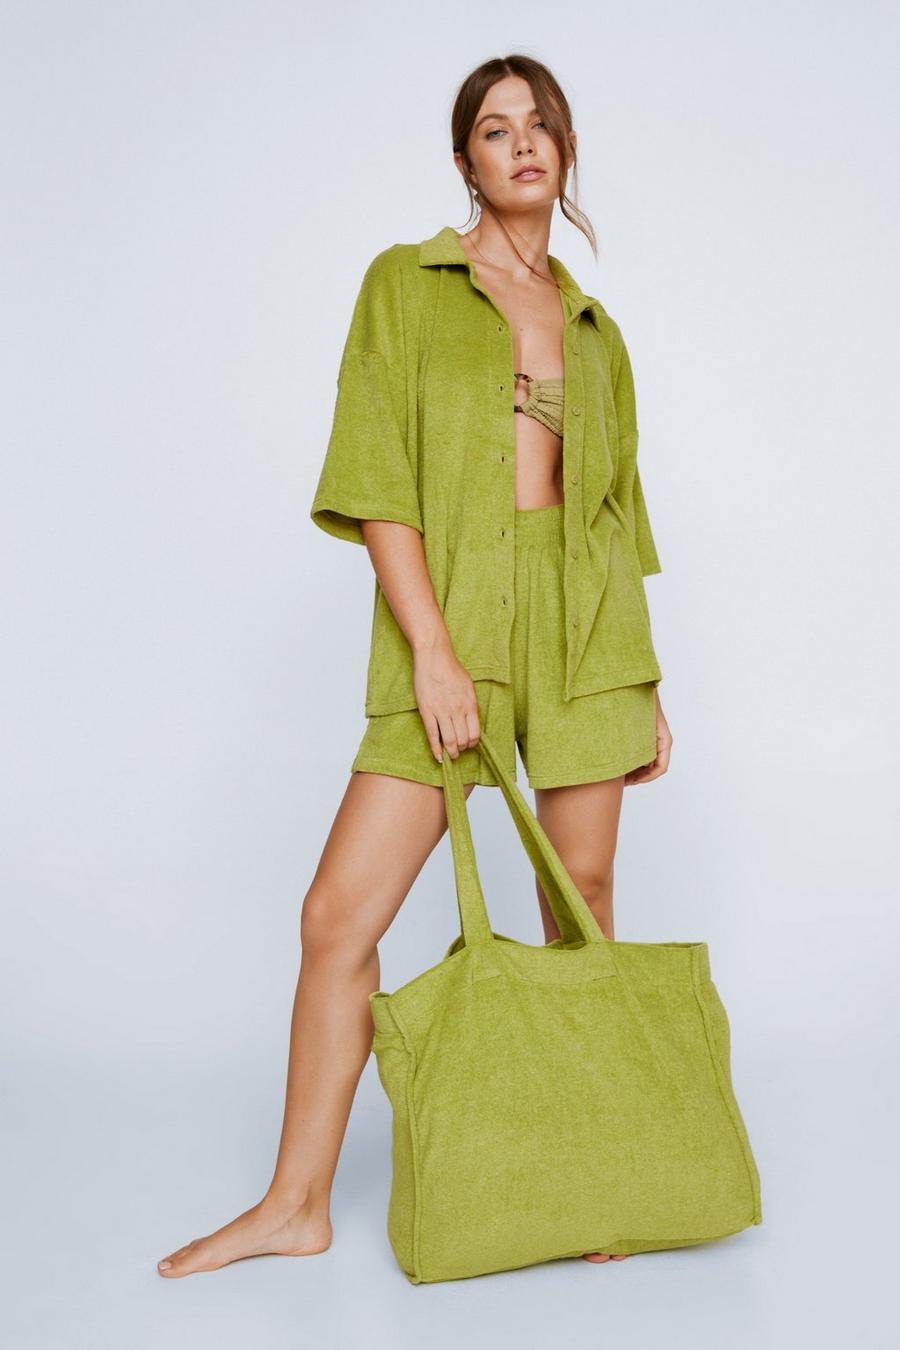 Olive Towelling Shirt and Shorts 4 Piece Cover Up Set